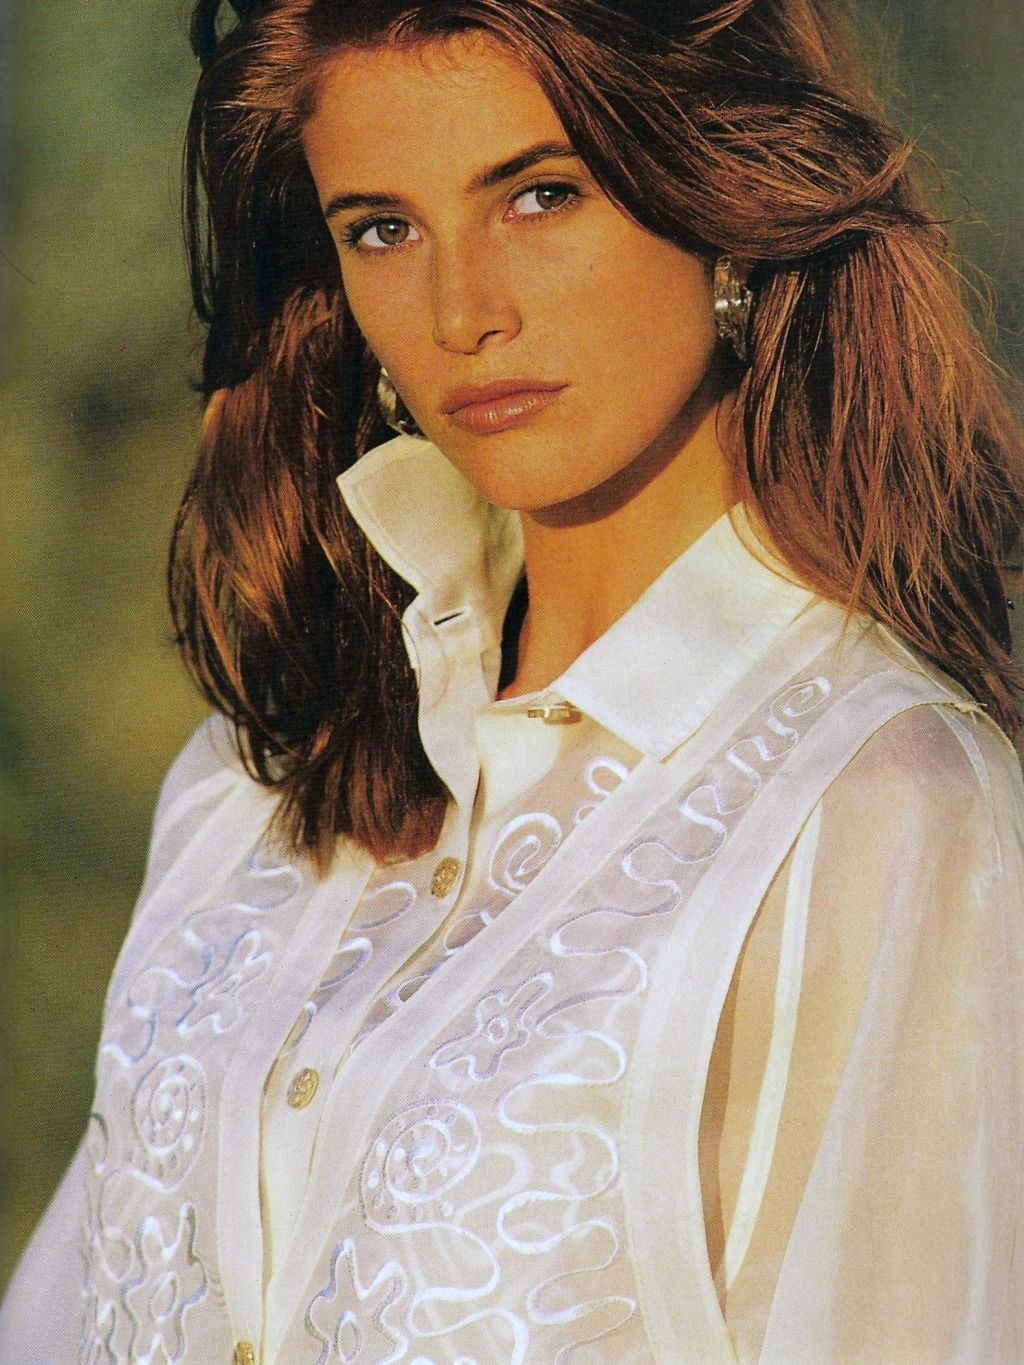 Angie_Everhart_--_Mix_Of_ELLE_Magazine_88To95_009.jpg